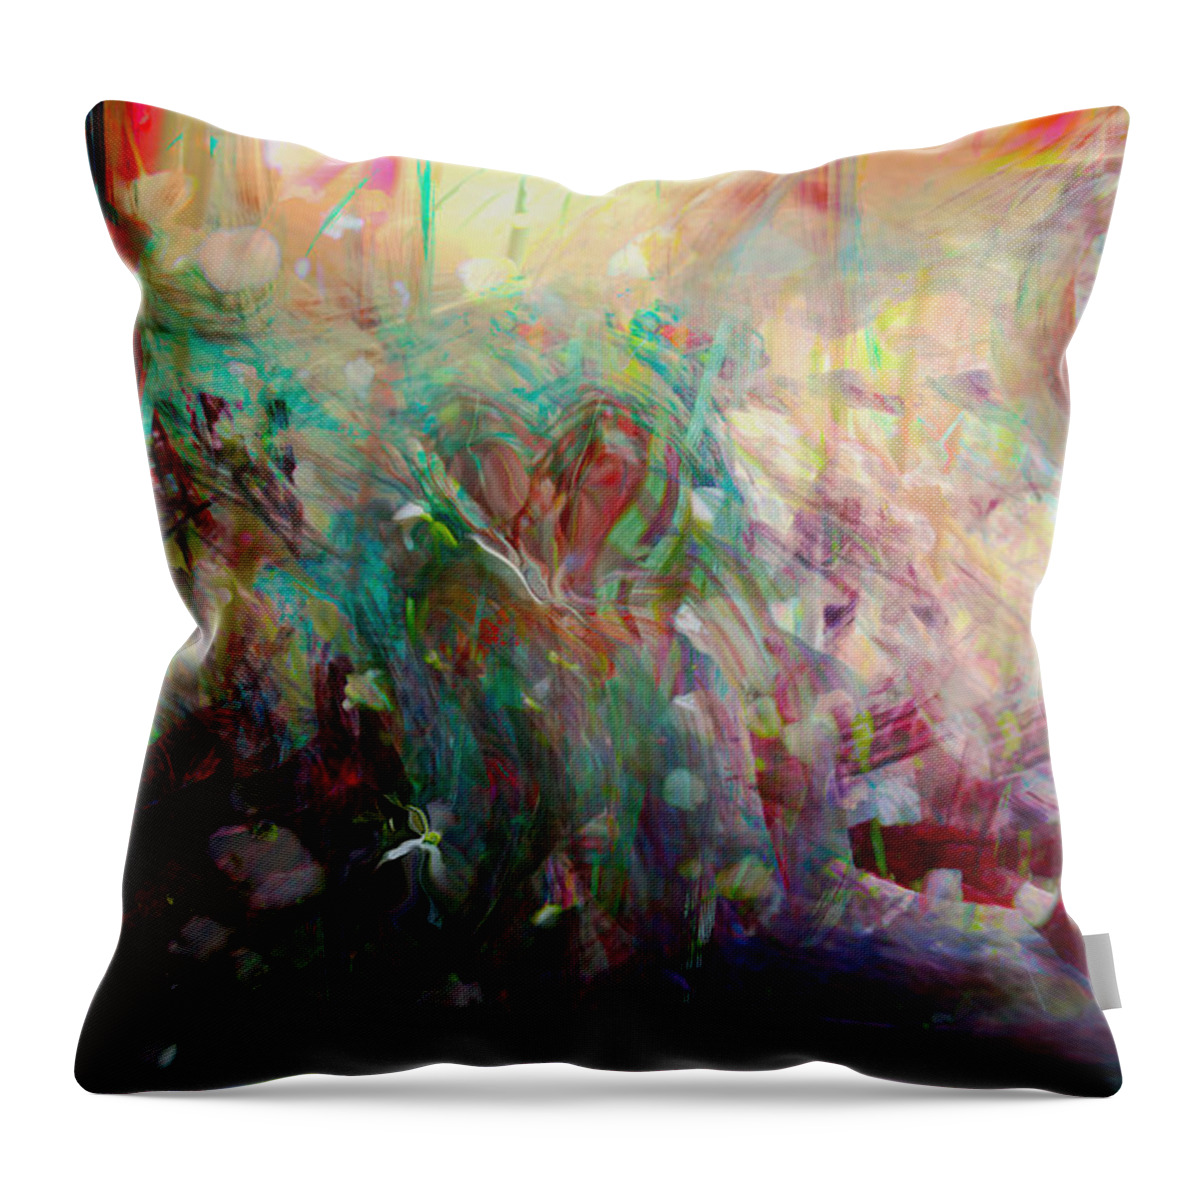 Abstract Art Throw Pillow featuring the digital art Something Beautiful by Linda Sannuti